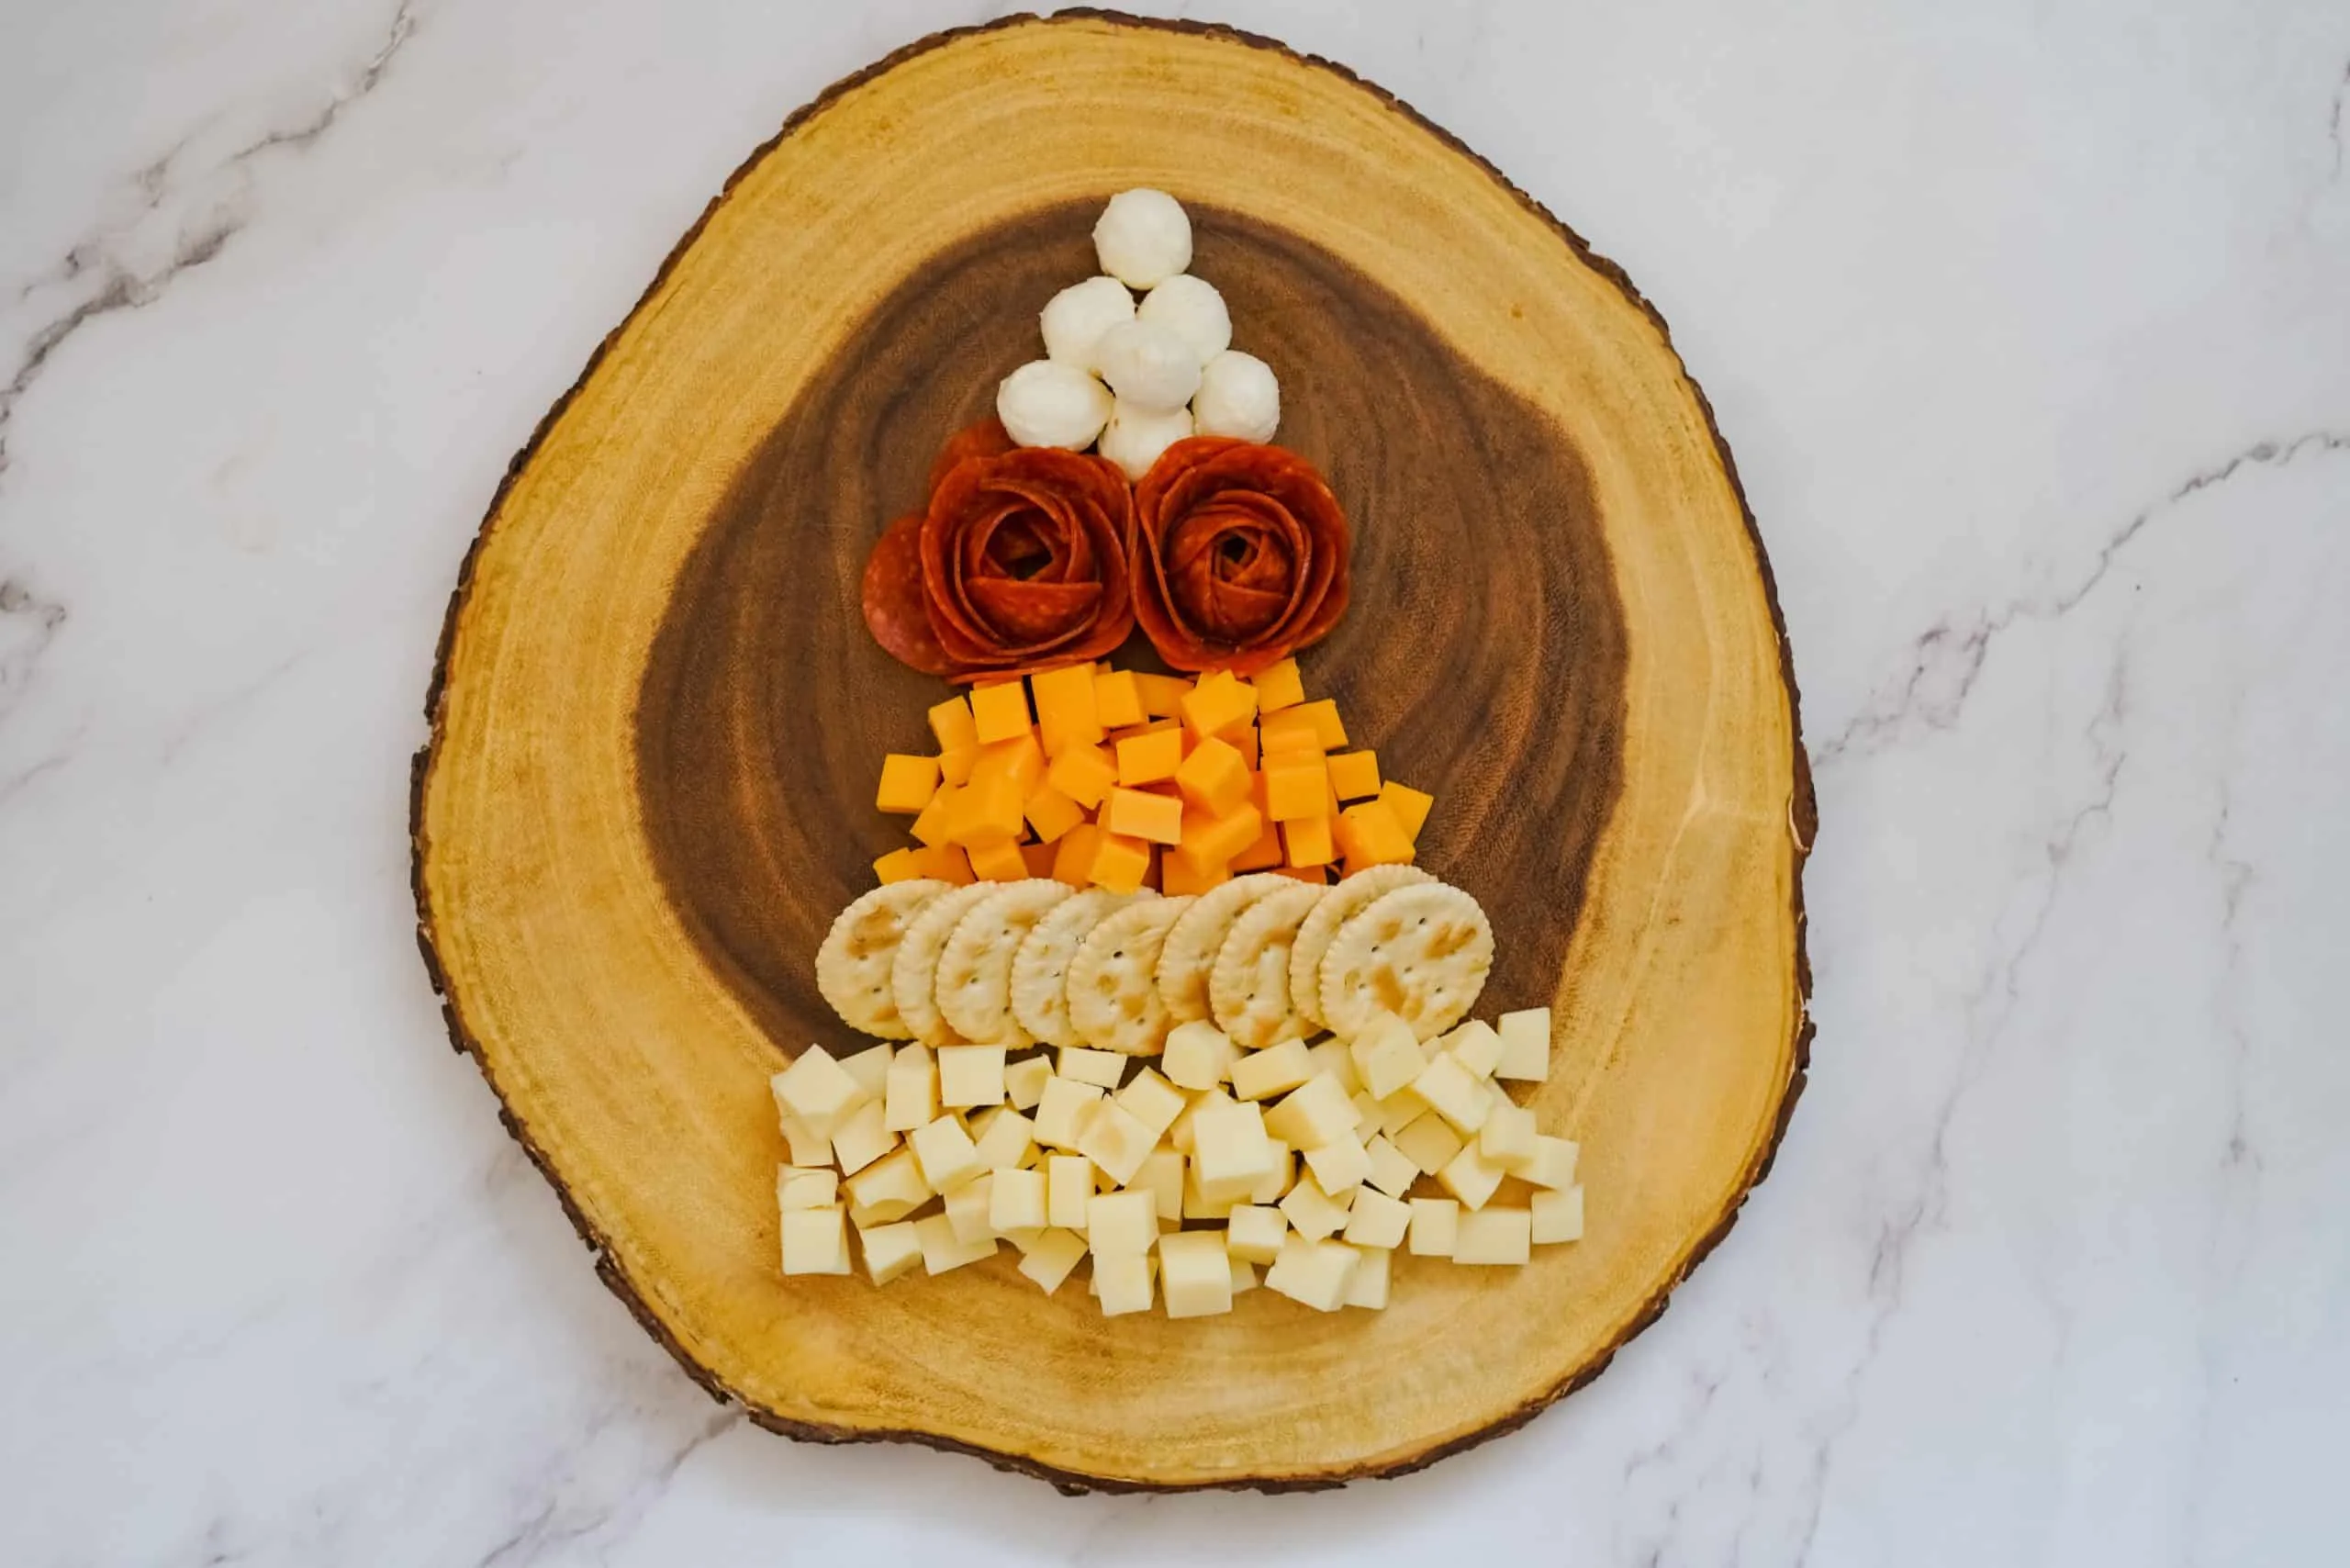 meats and cheeses in tree shape on wooden cutting board 